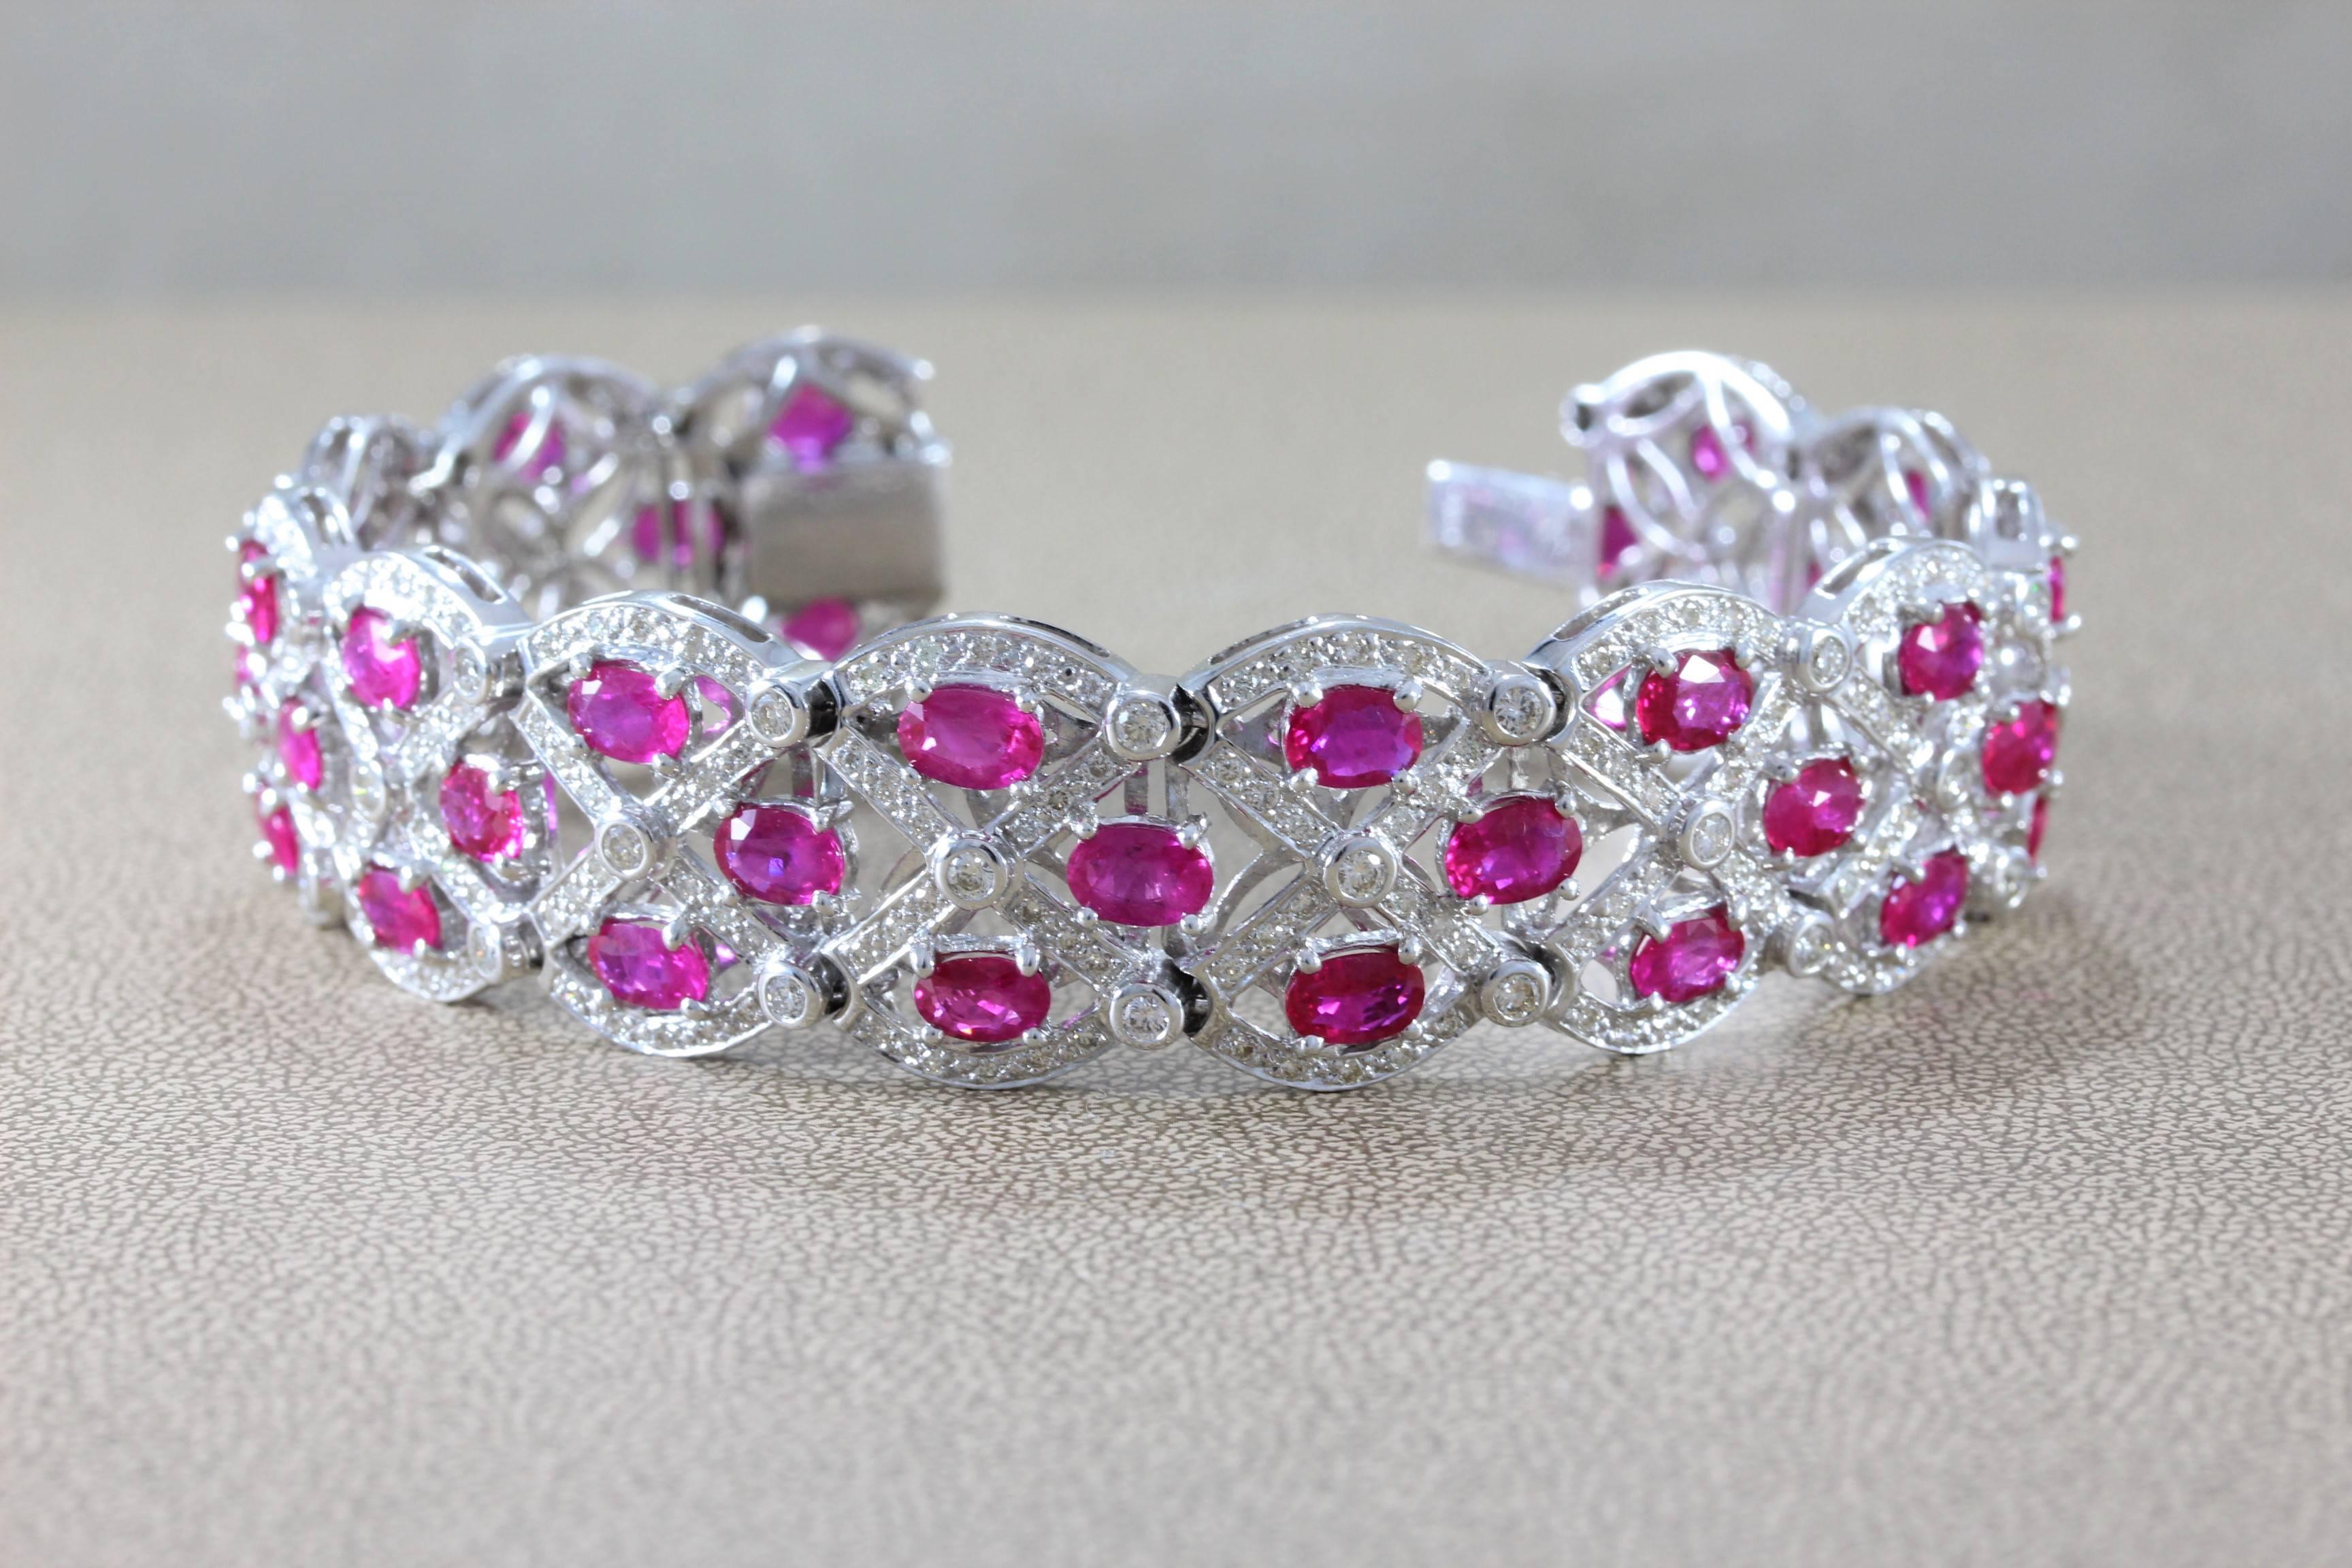 Fiery bursts of red flashes can be seen emanating from this bracelet which features over 20 carats of vivid red oval shaped rubies. Raining down sparkles and brilliance are 4.74 carats of round cut diamonds, set in 18K white gold. 

Length: 7 ½